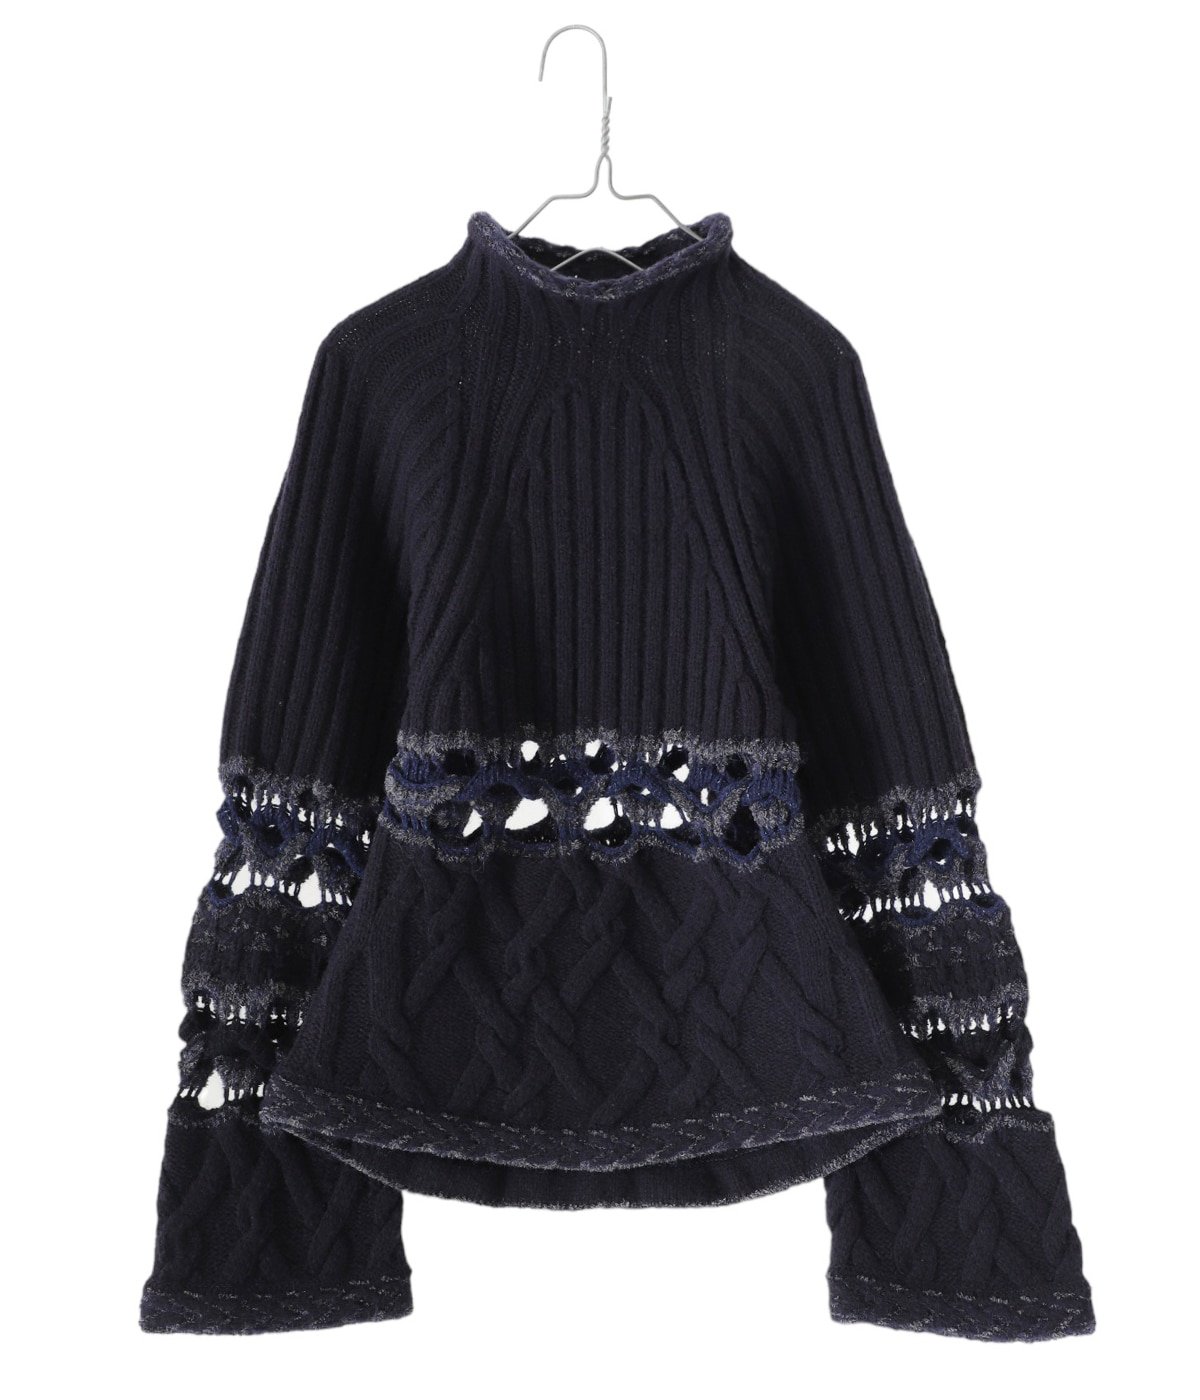 mame Knitted Pullover マメ ニット数回着用後クリーニング済みです